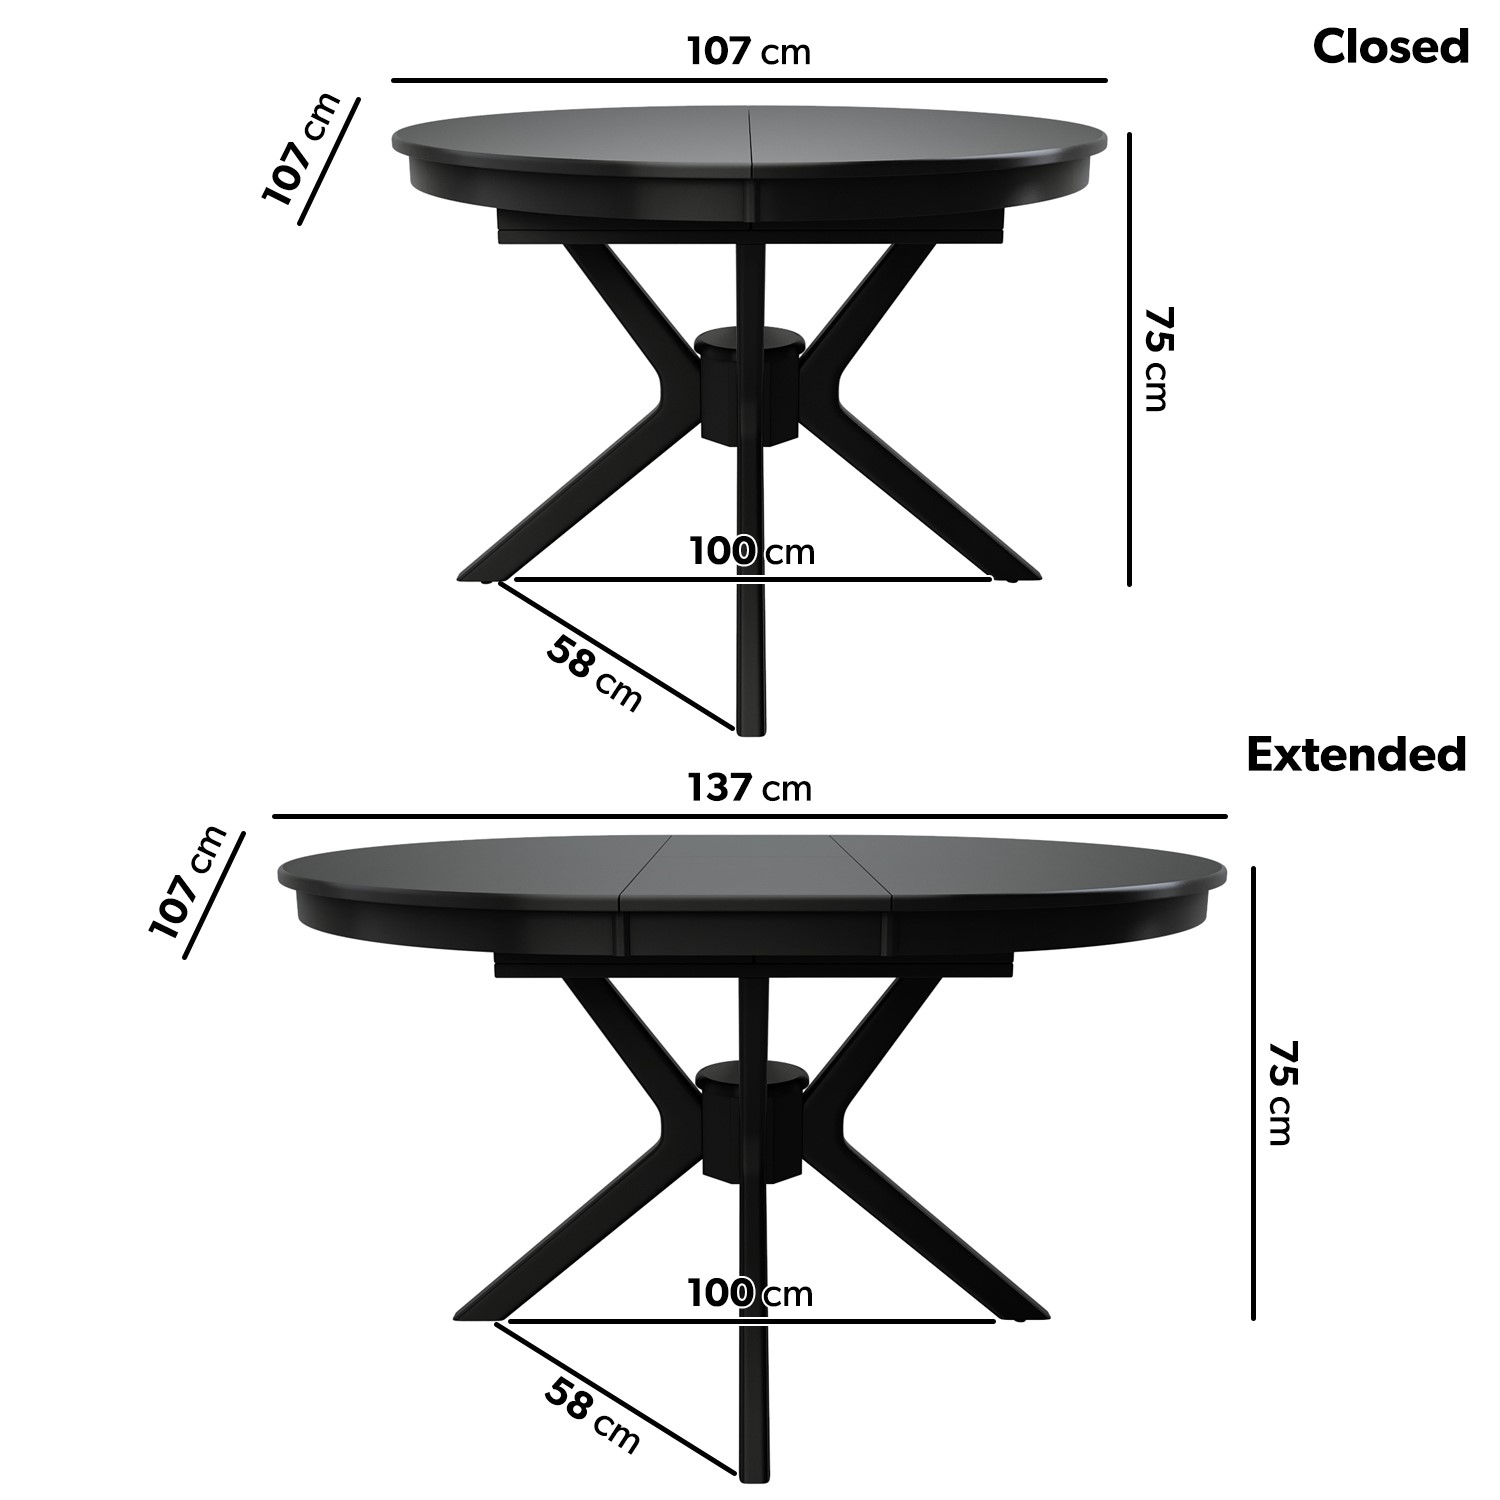 Read more about Large black extendable round to oval dining table seats 4-6 karie